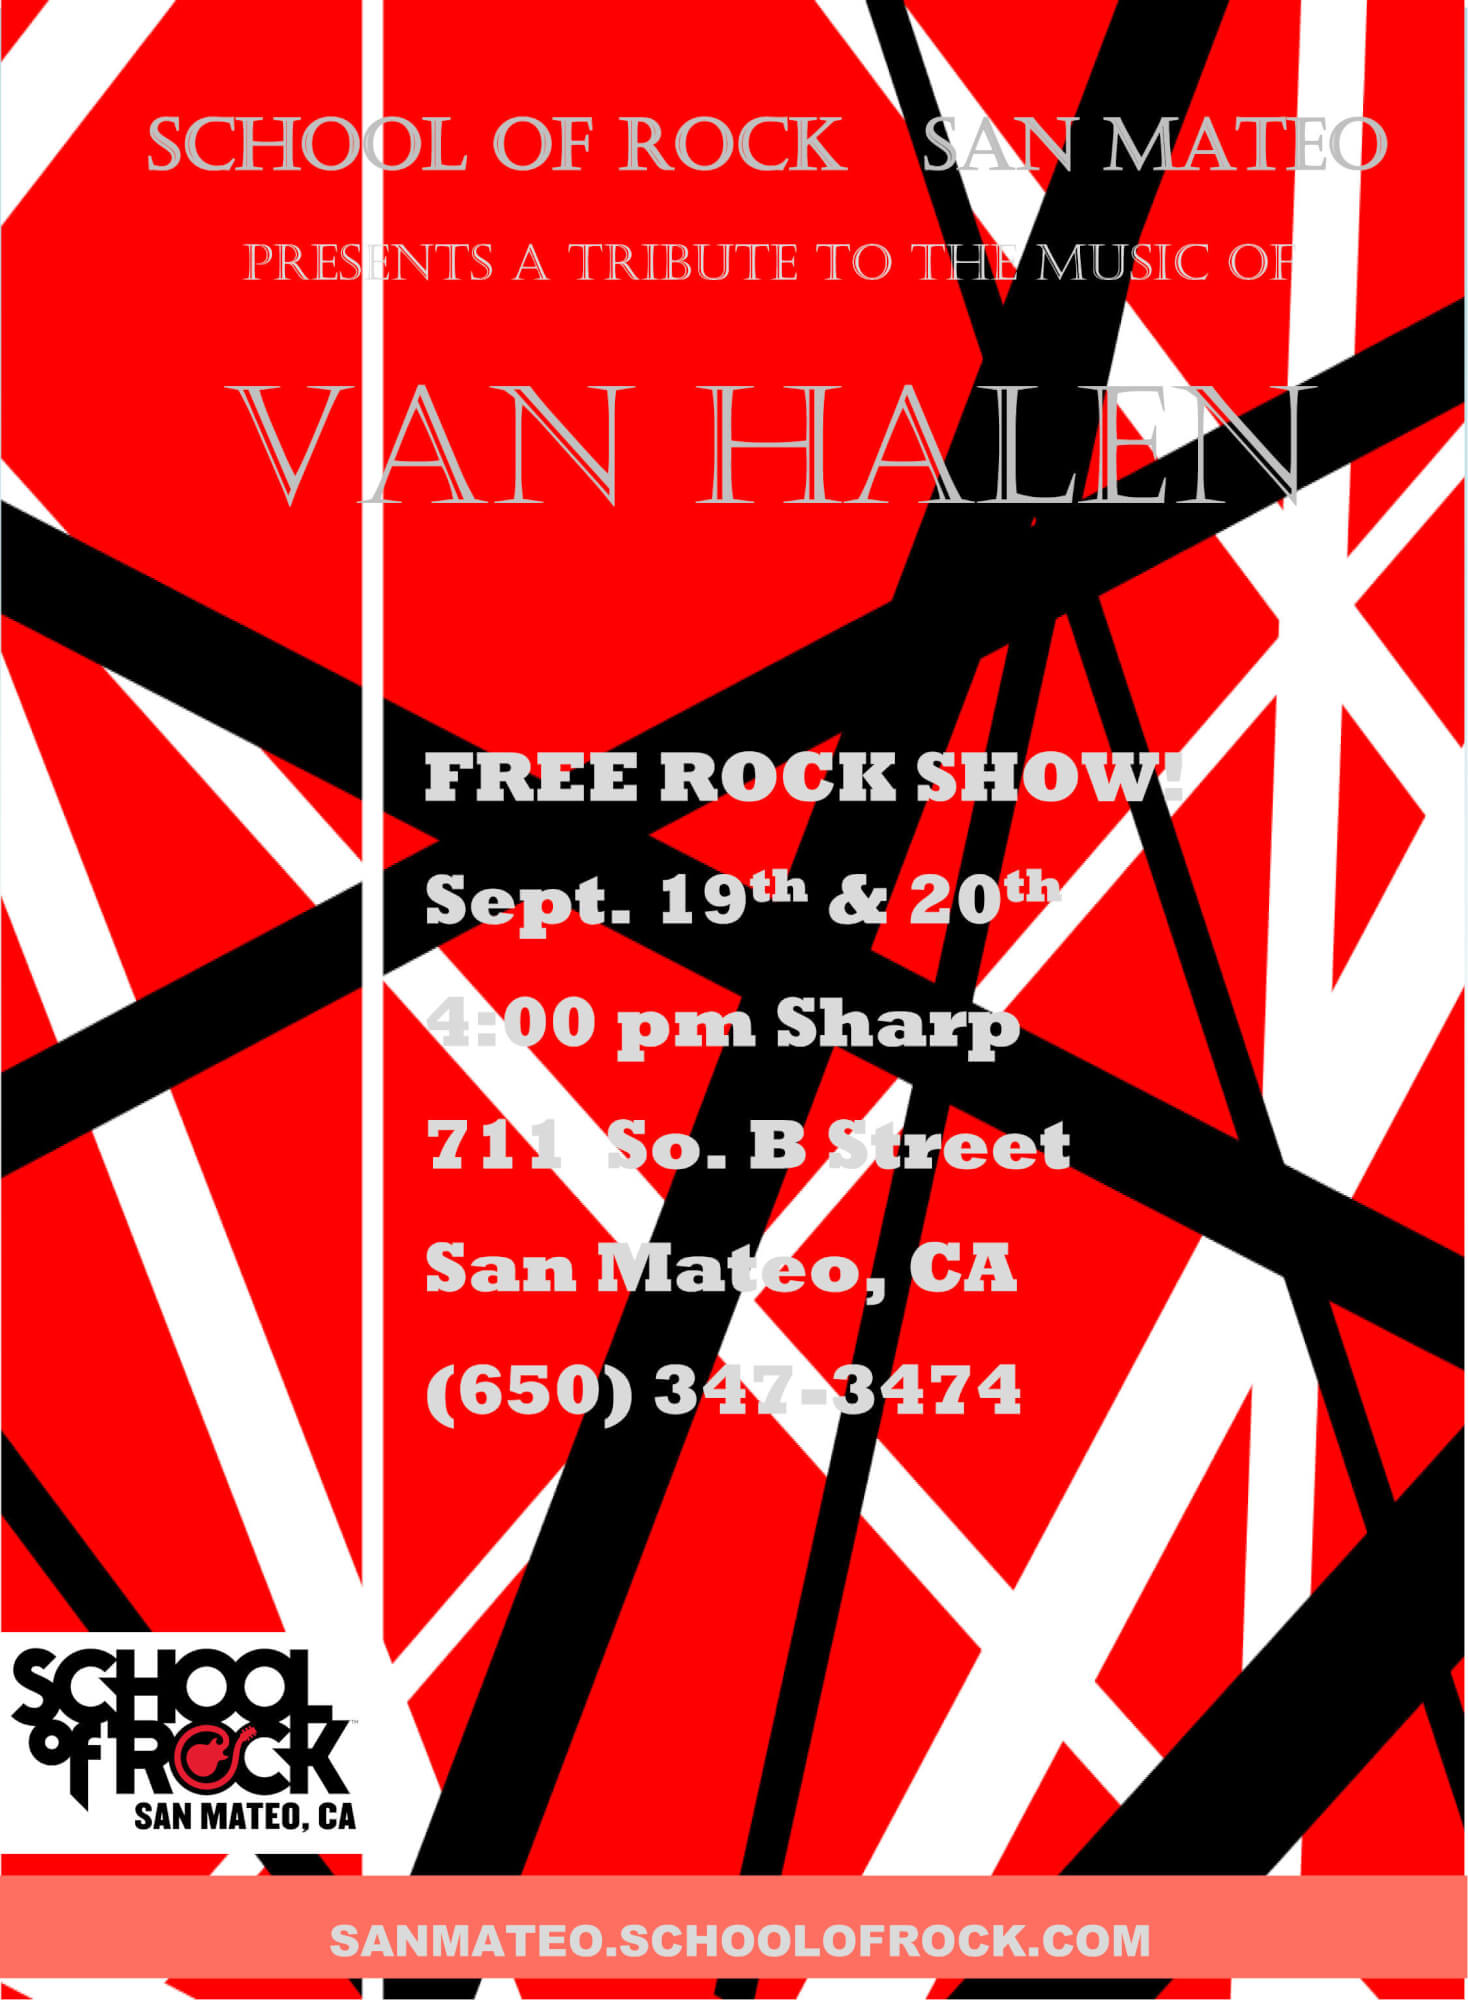 FREE ROCK SHOW Sept. 19th & 20th